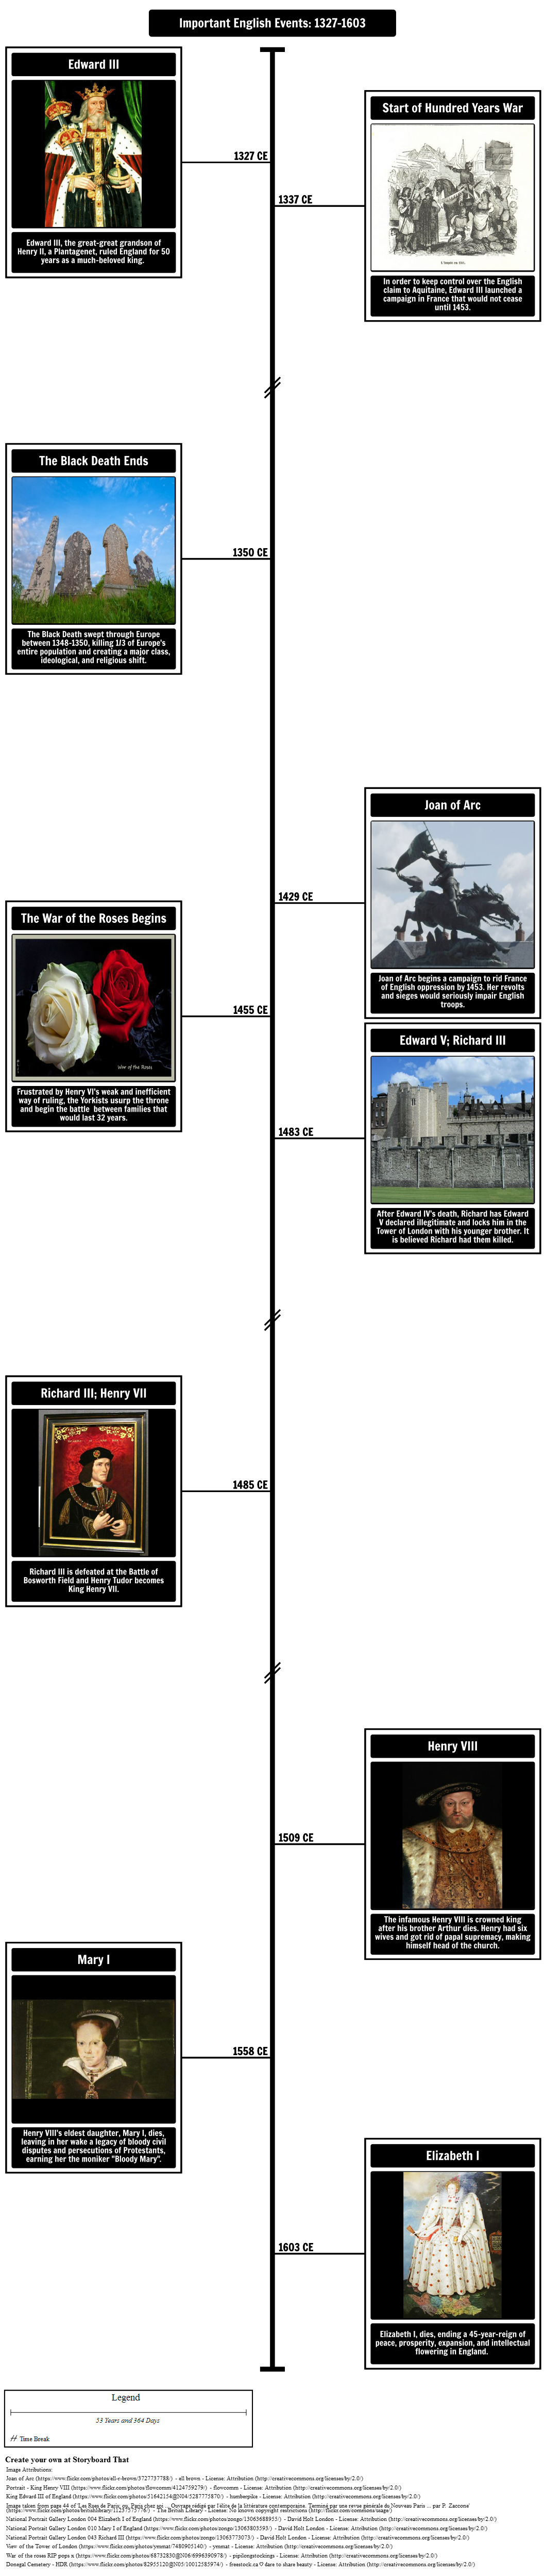 Timeline of Important English Events: 1327-1603